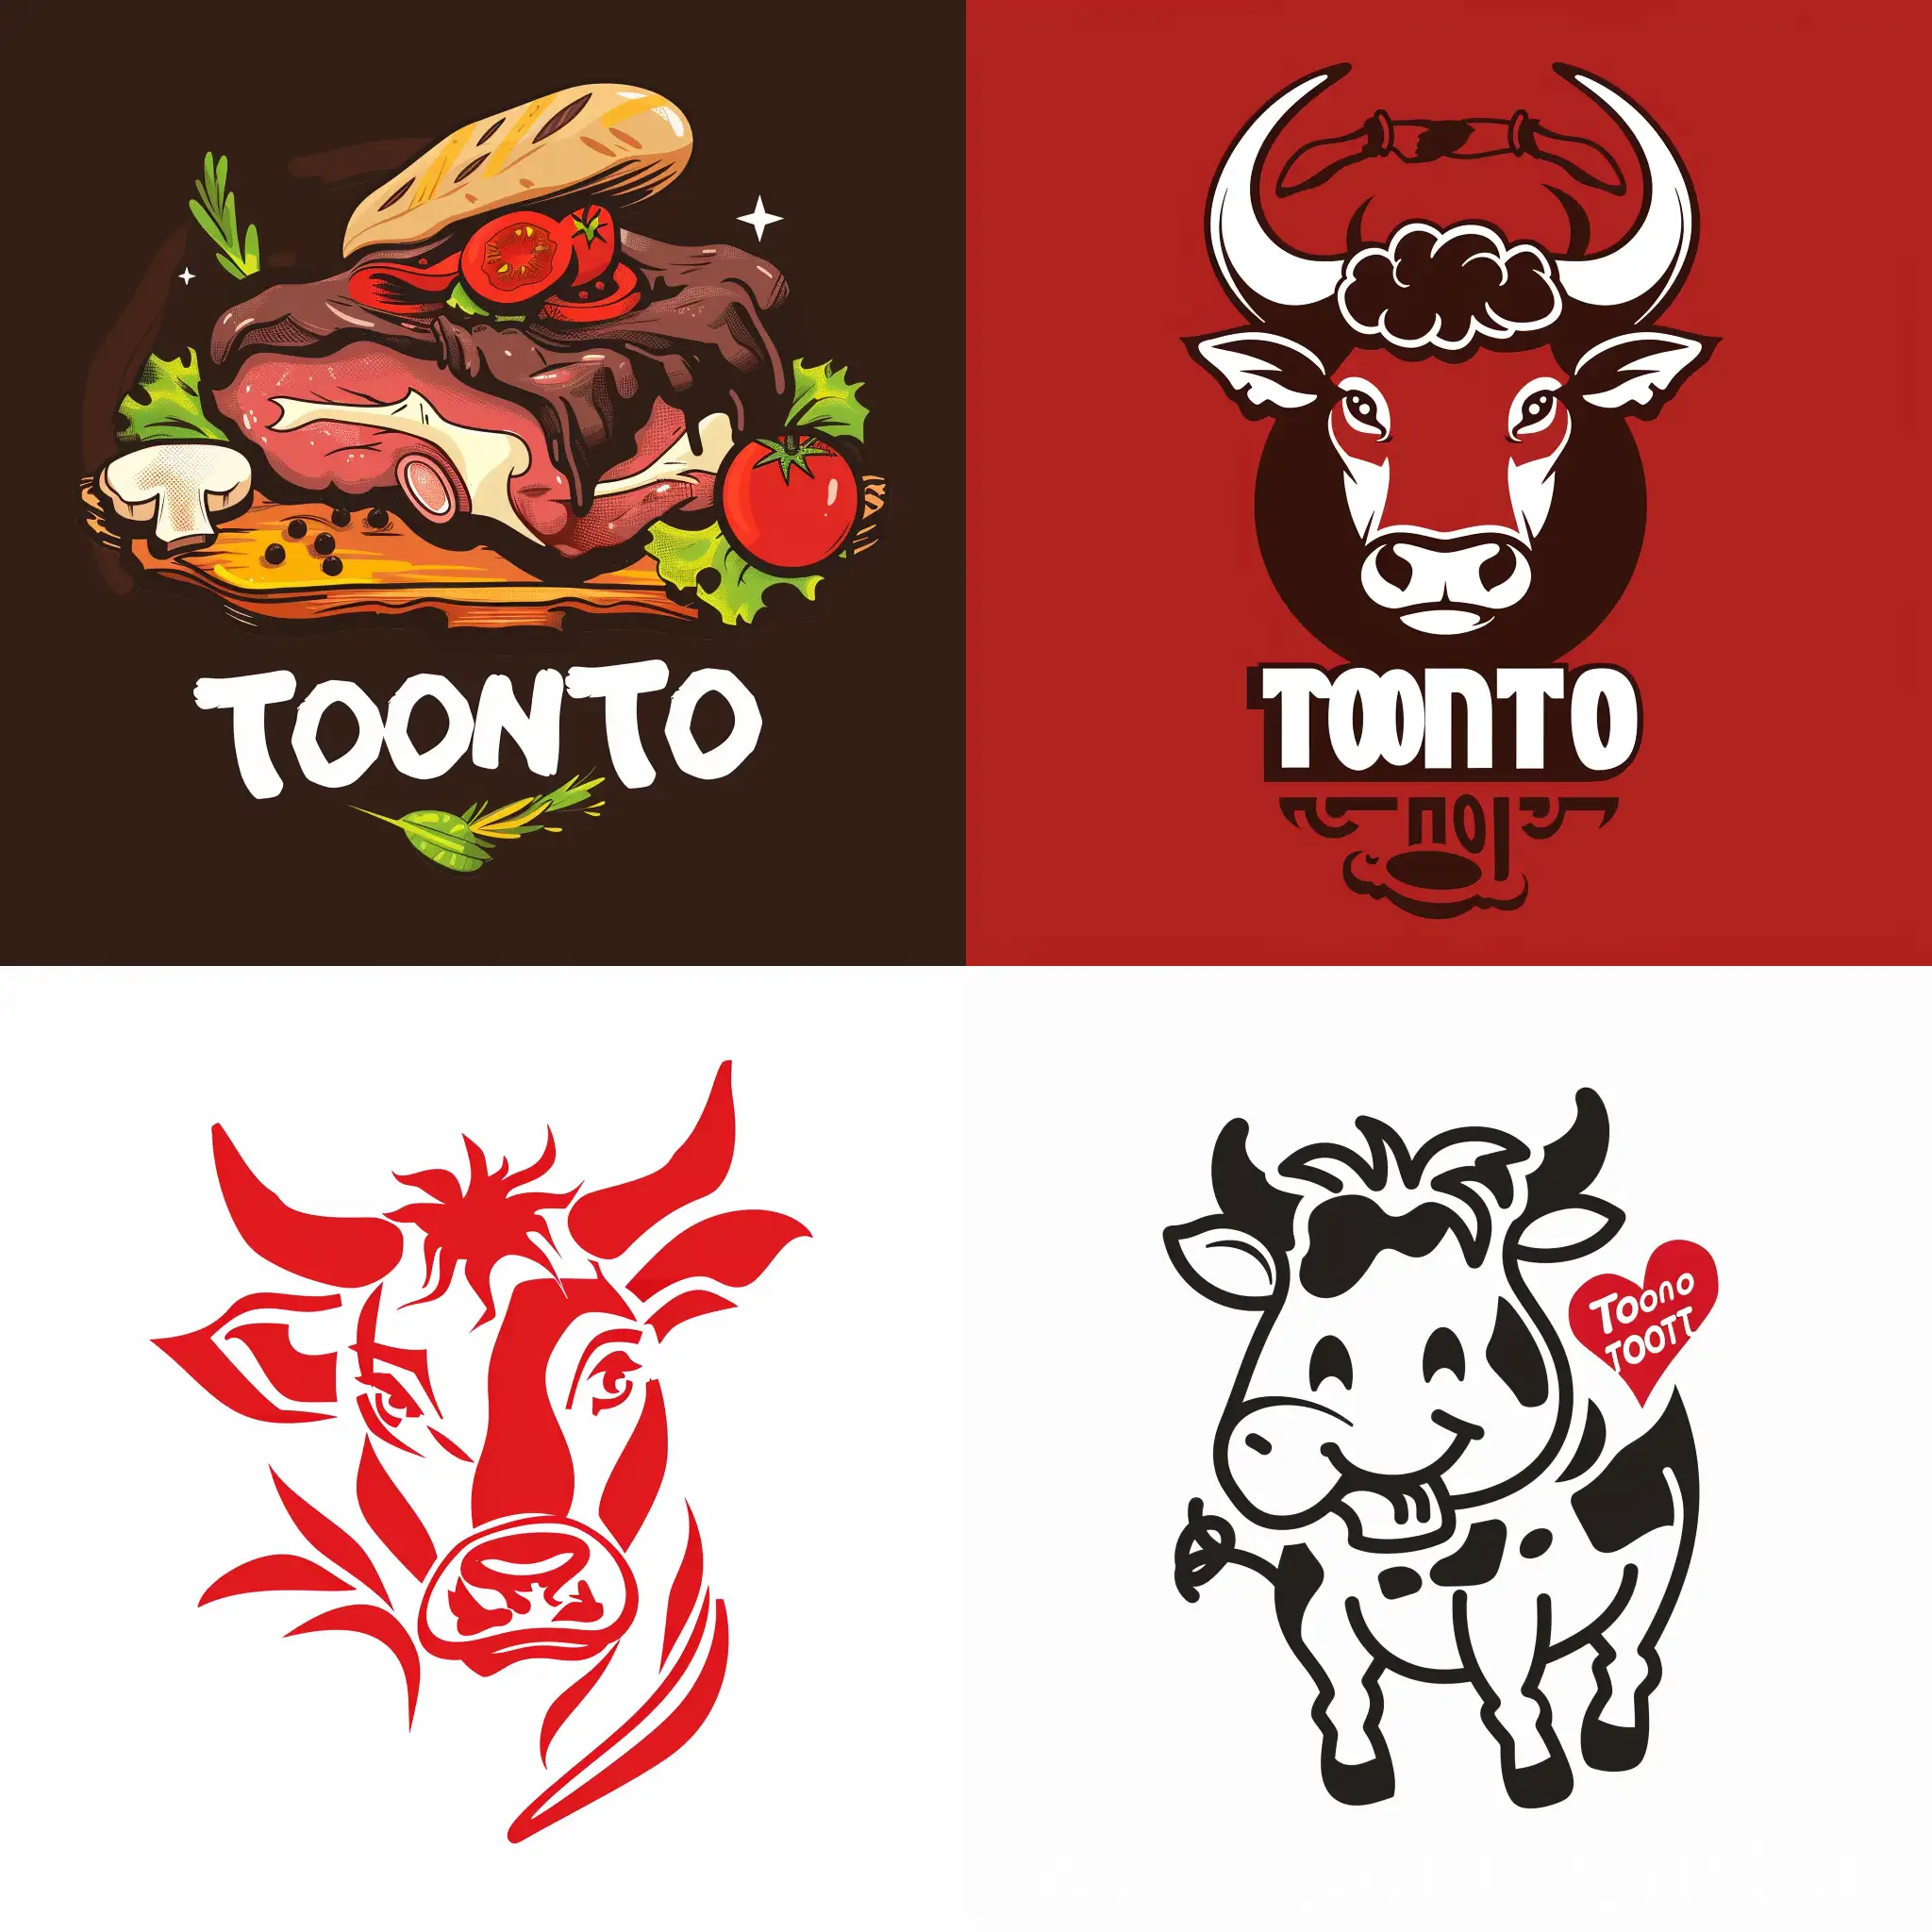 create a logo for the production of semi-finished meat products "Toonto" in Buryatia, which will convey family values, hearth, care and traditions of the Buryat people